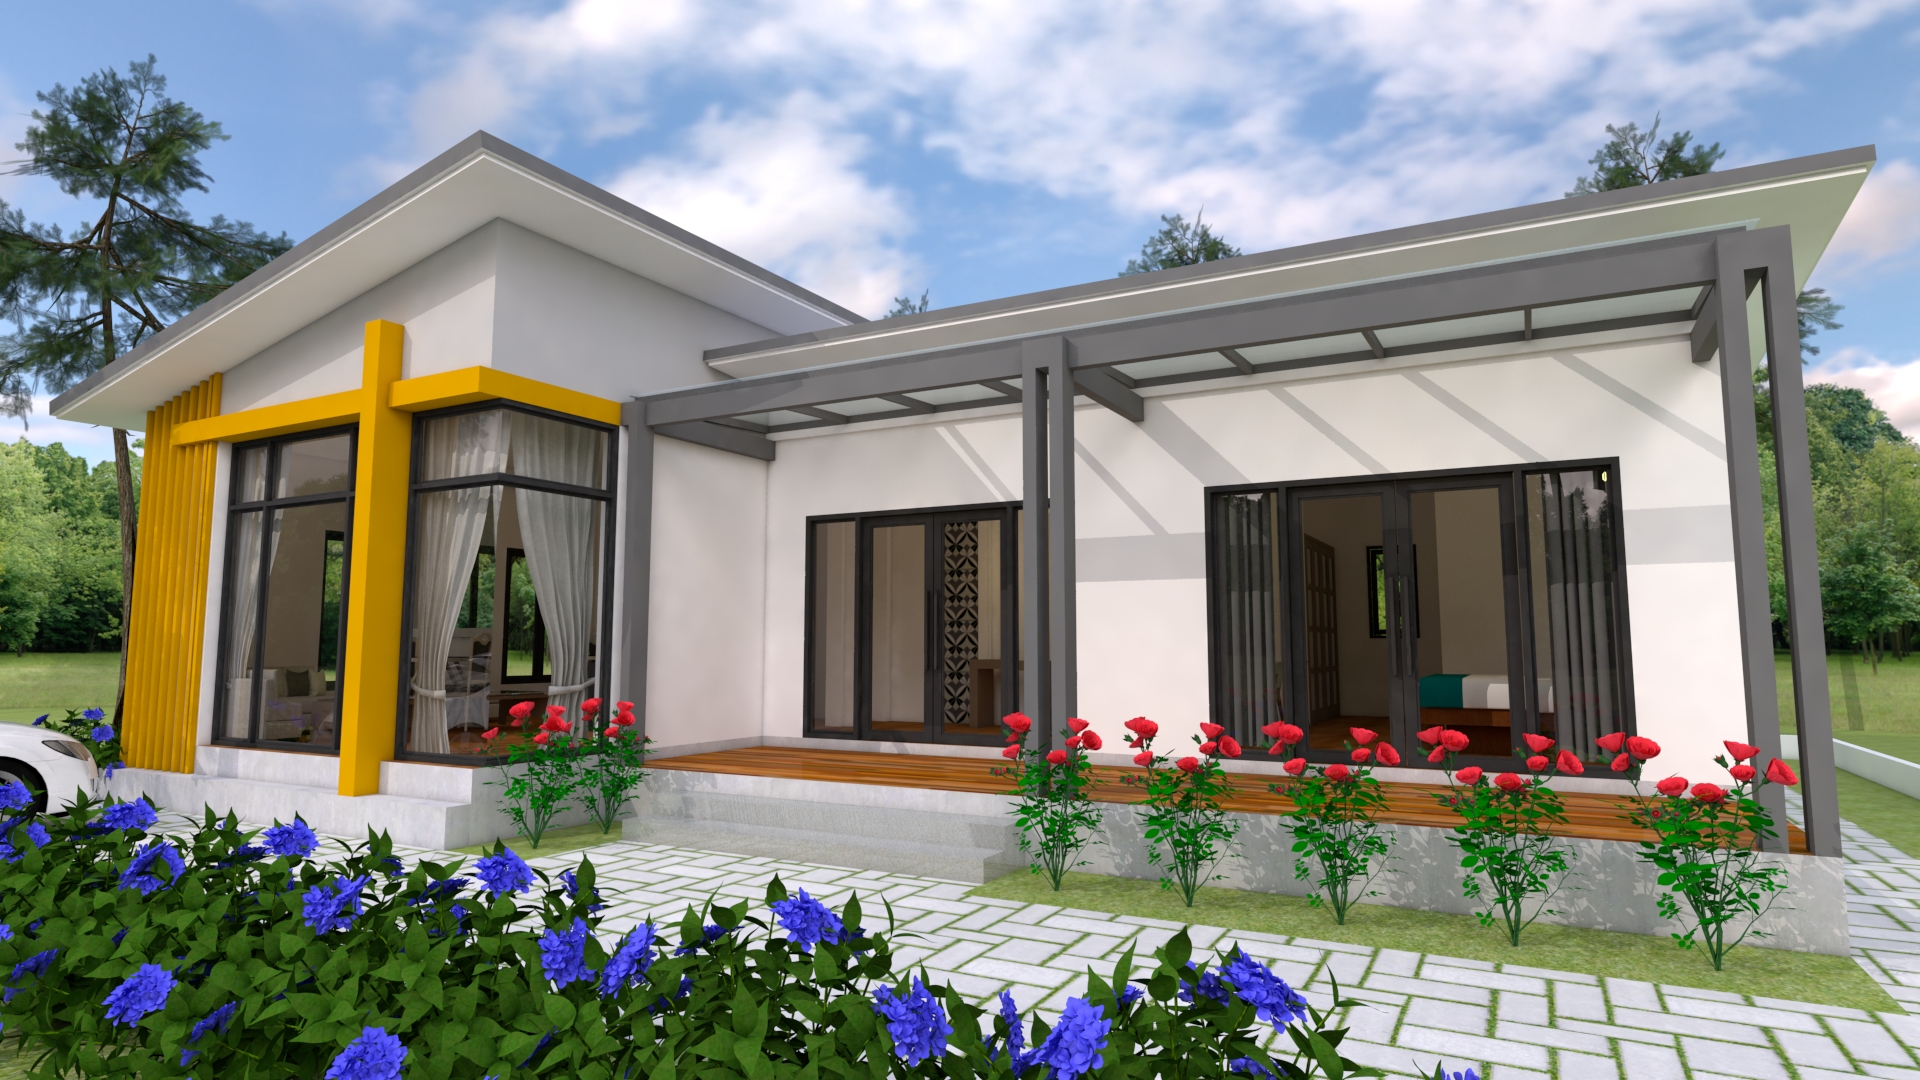 House Design 3d 13x9.5 Meter 43x31 Feet 2 Bedrooms Shed roof